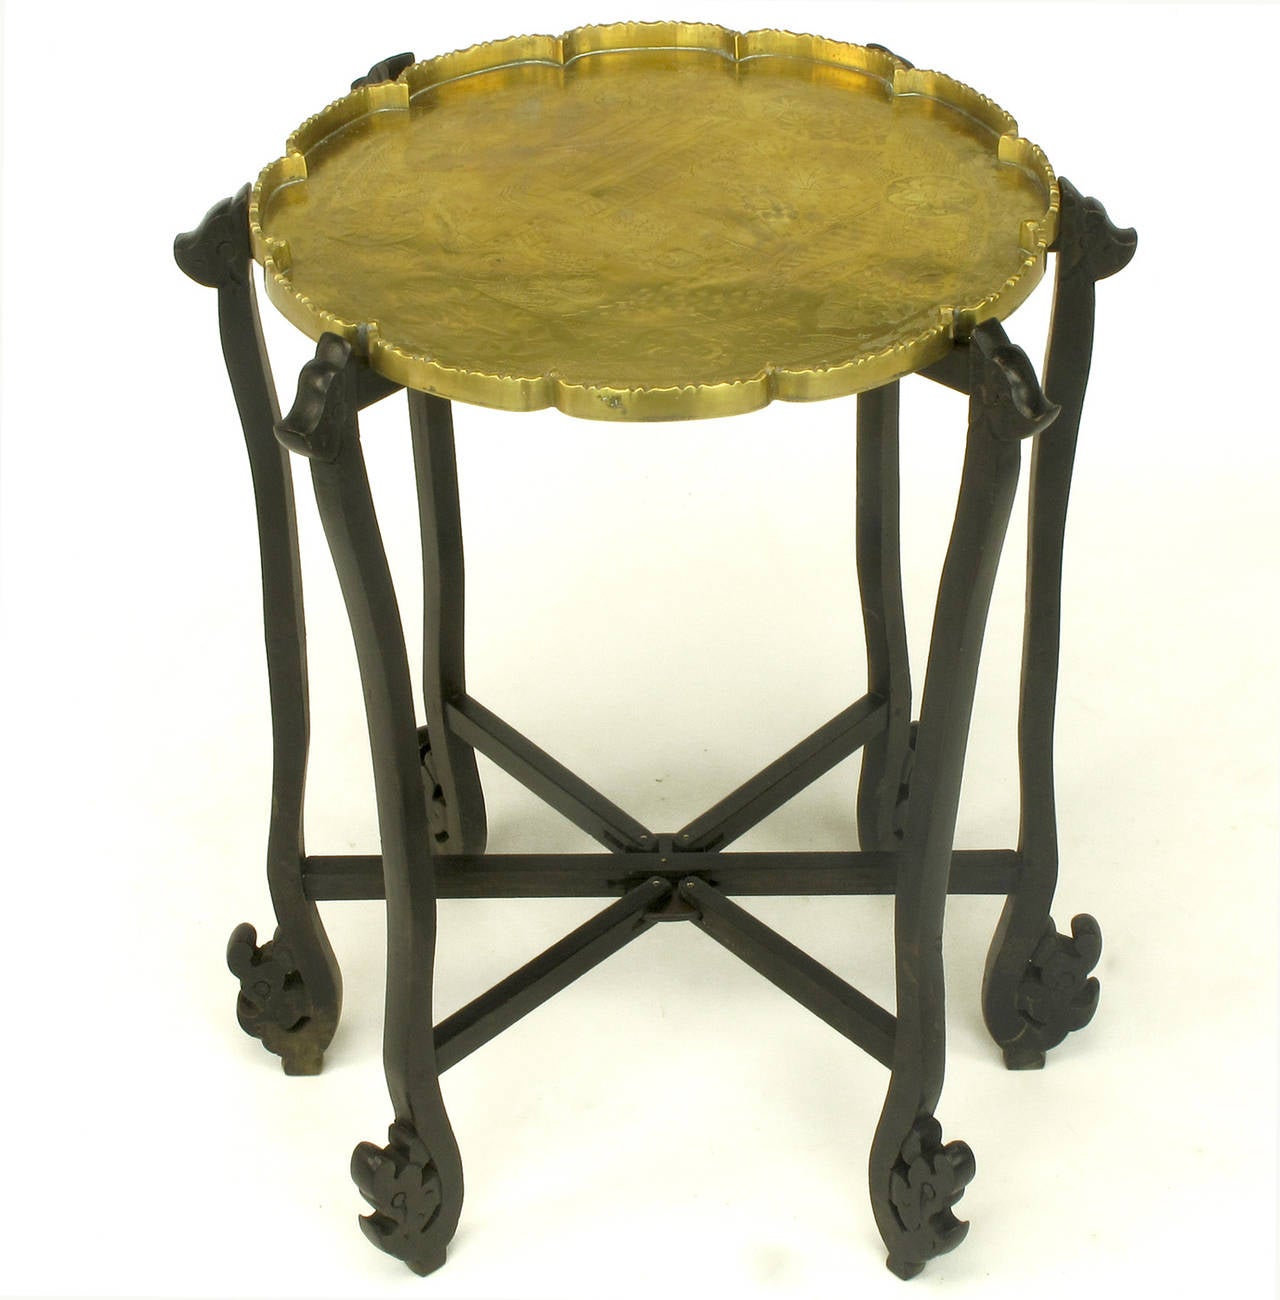 Exotic folding tray table of carved ebony wood with six legs that fold flat. Etched scene into thick brass tray with scalloped edging can be seen in image 4.